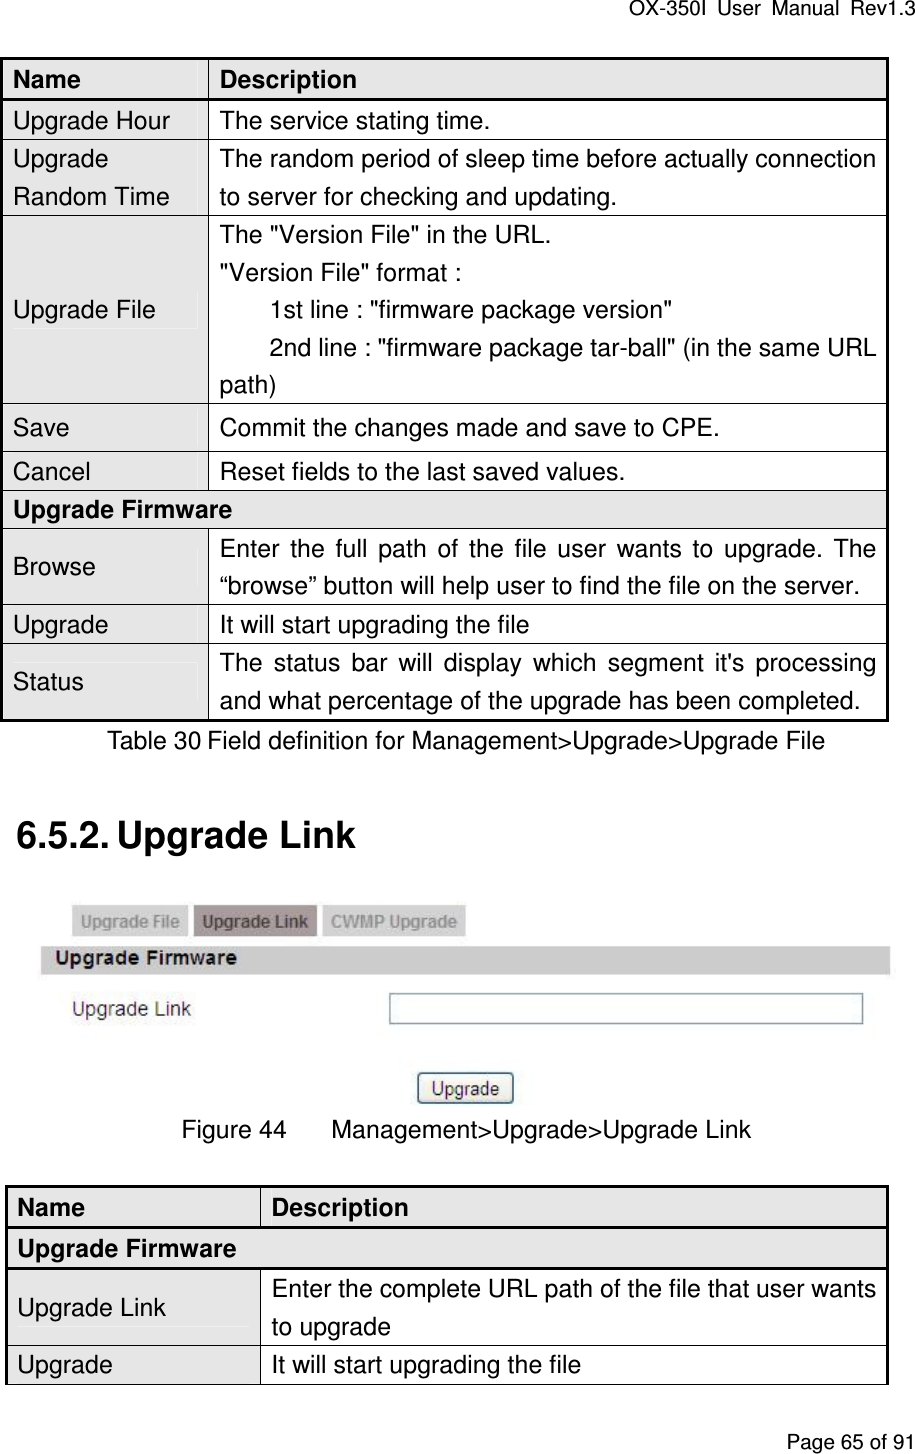 OX-350I  User  Manual  Rev1.3 Page 65 of 91 Name  Description Upgrade Hour  The service stating time. Upgrade Random Time The random period of sleep time before actually connection to server for checking and updating. Upgrade File The &quot;Version File&quot; in the URL. &quot;Version File&quot; format :   1st line : &quot;firmware package version&quot;   2nd line : &quot;firmware package tar-ball&quot; (in the same URL path) Save  Commit the changes made and save to CPE. Cancel  Reset fields to the last saved values. Upgrade Firmware Browse  Enter  the  full  path  of  the  file  user  wants  to  upgrade.  The “browse” button will help user to find the file on the server. Upgrade  It will start upgrading the file Status  The  status  bar  will  display  which  segment  it&apos;s  processing and what percentage of the upgrade has been completed. Table 30 Field definition for Management&gt;Upgrade&gt;Upgrade File 6.5.2. Upgrade Link    Figure 44  Management&gt;Upgrade&gt;Upgrade Link Name  Description Upgrade Firmware Upgrade Link  Enter the complete URL path of the file that user wants to upgrade Upgrade  It will start upgrading the file 